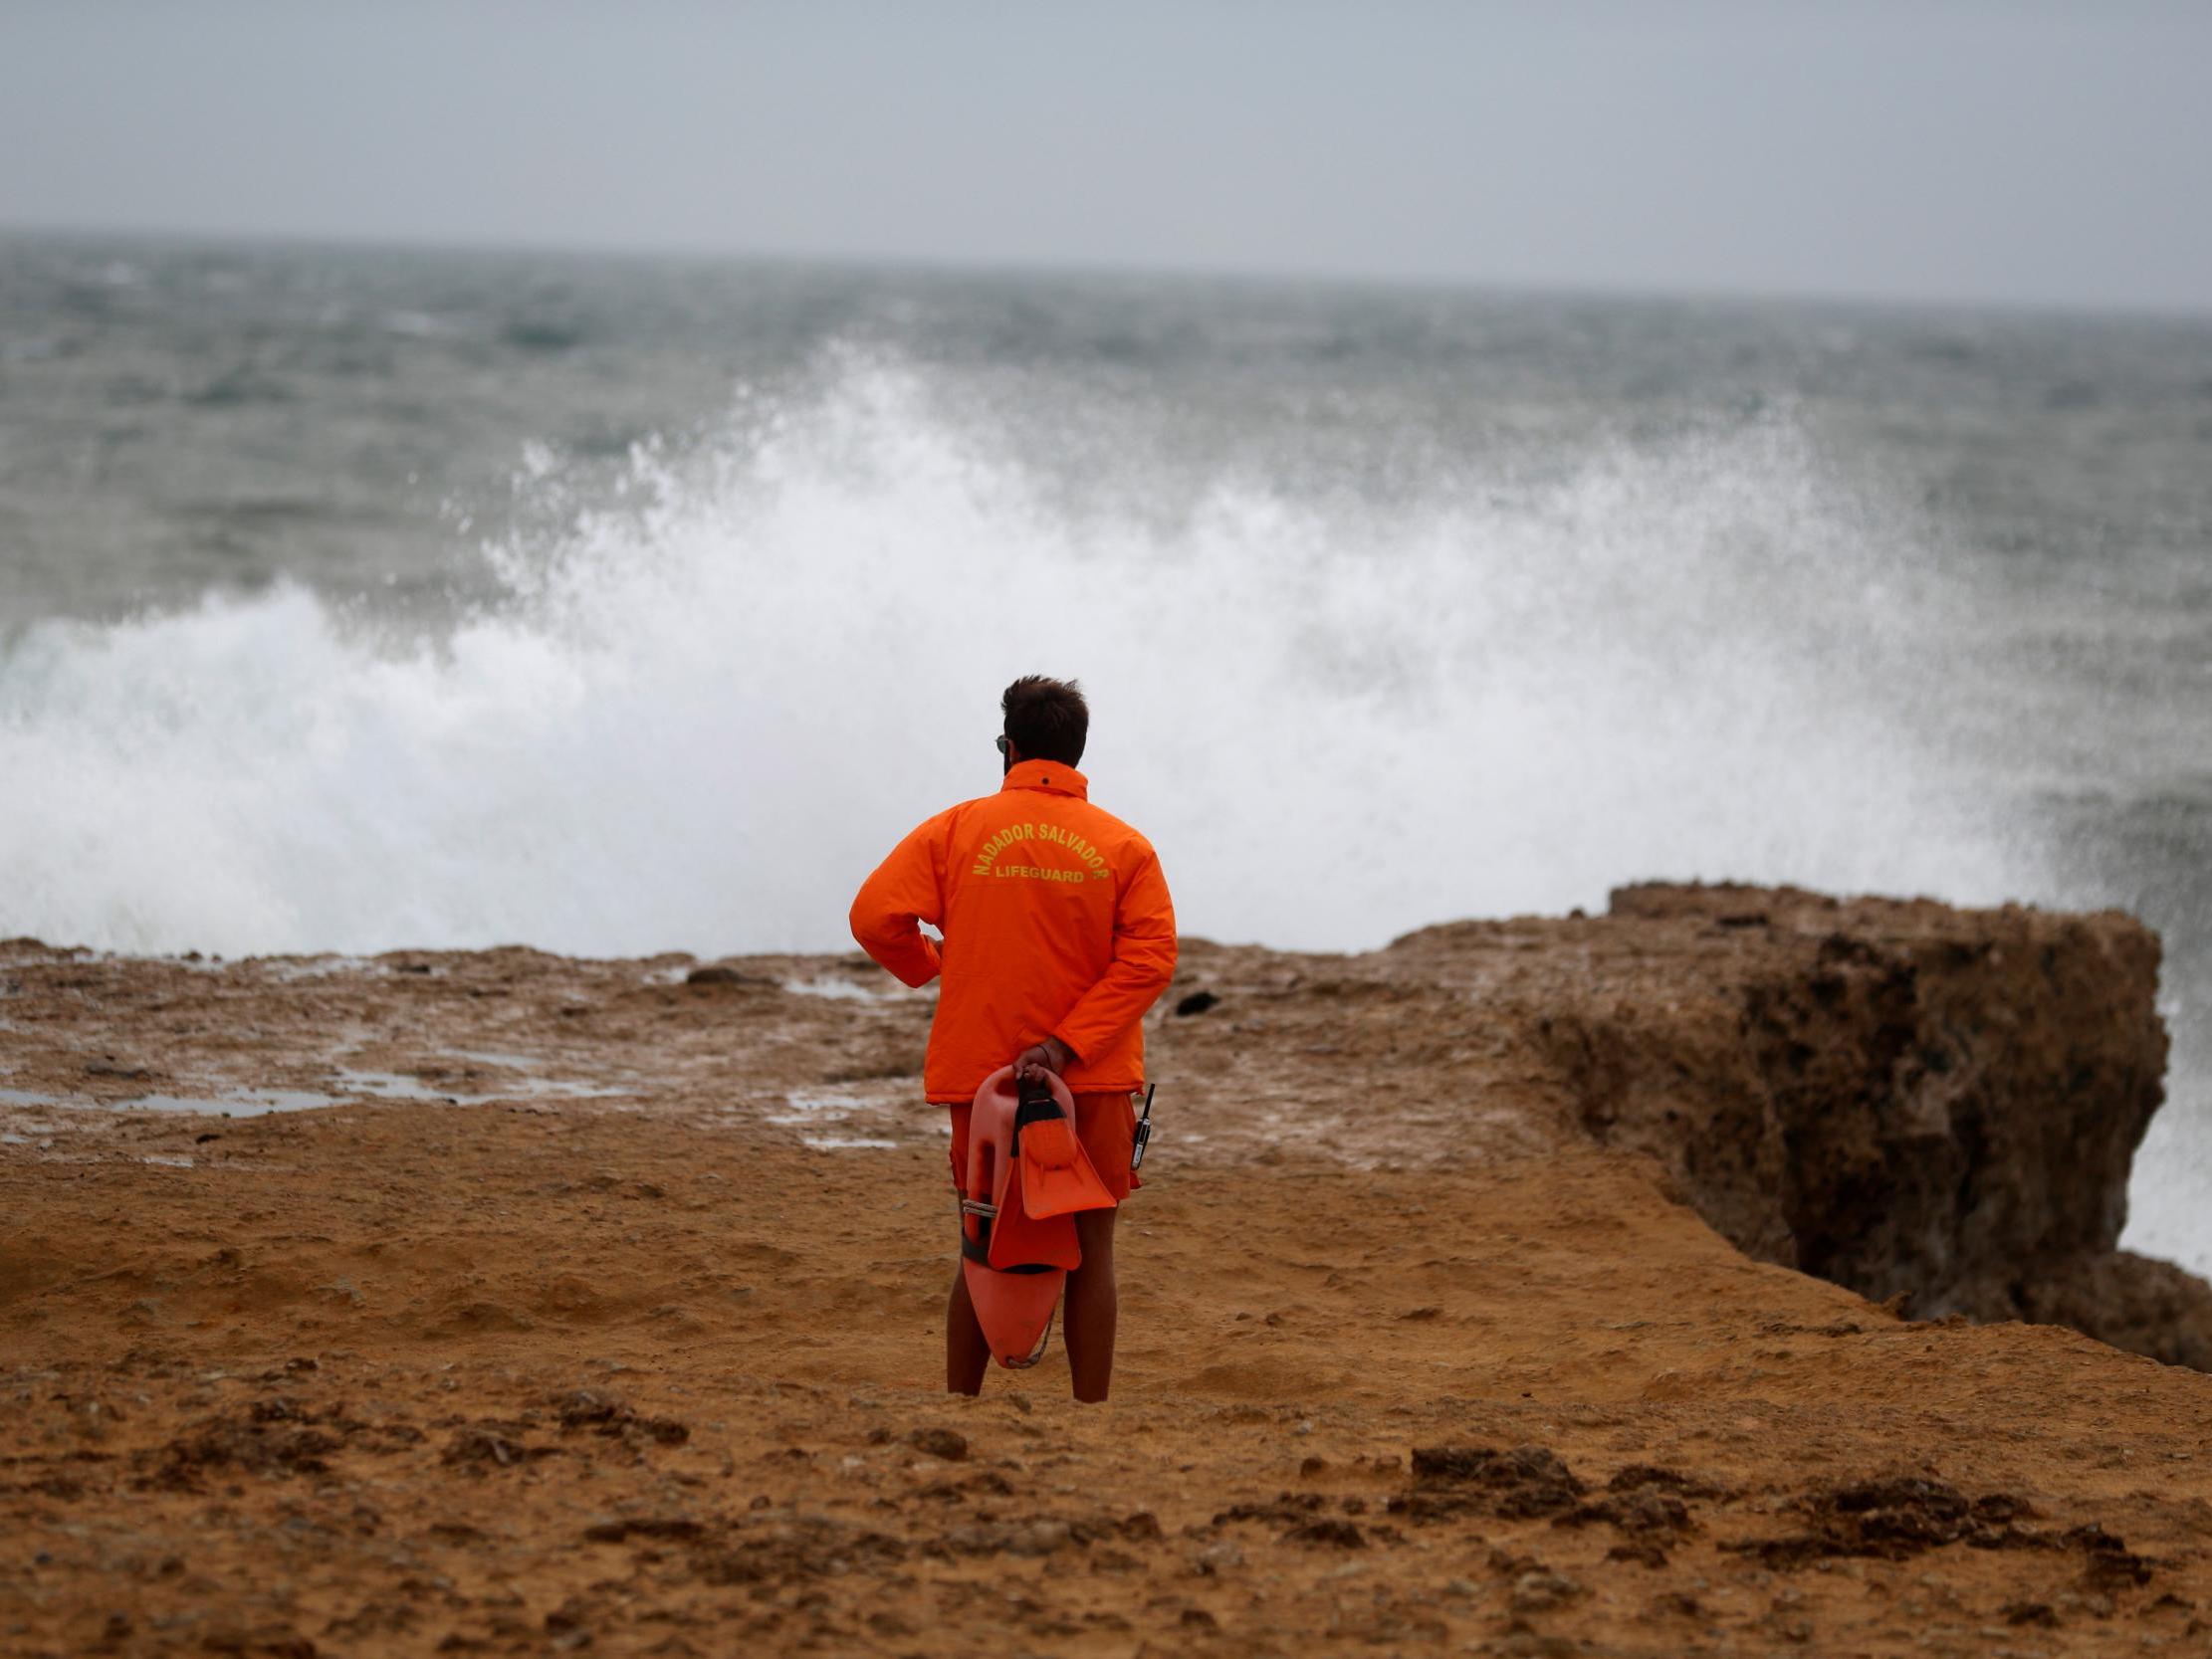 Authorities advised people to stay away from the coast